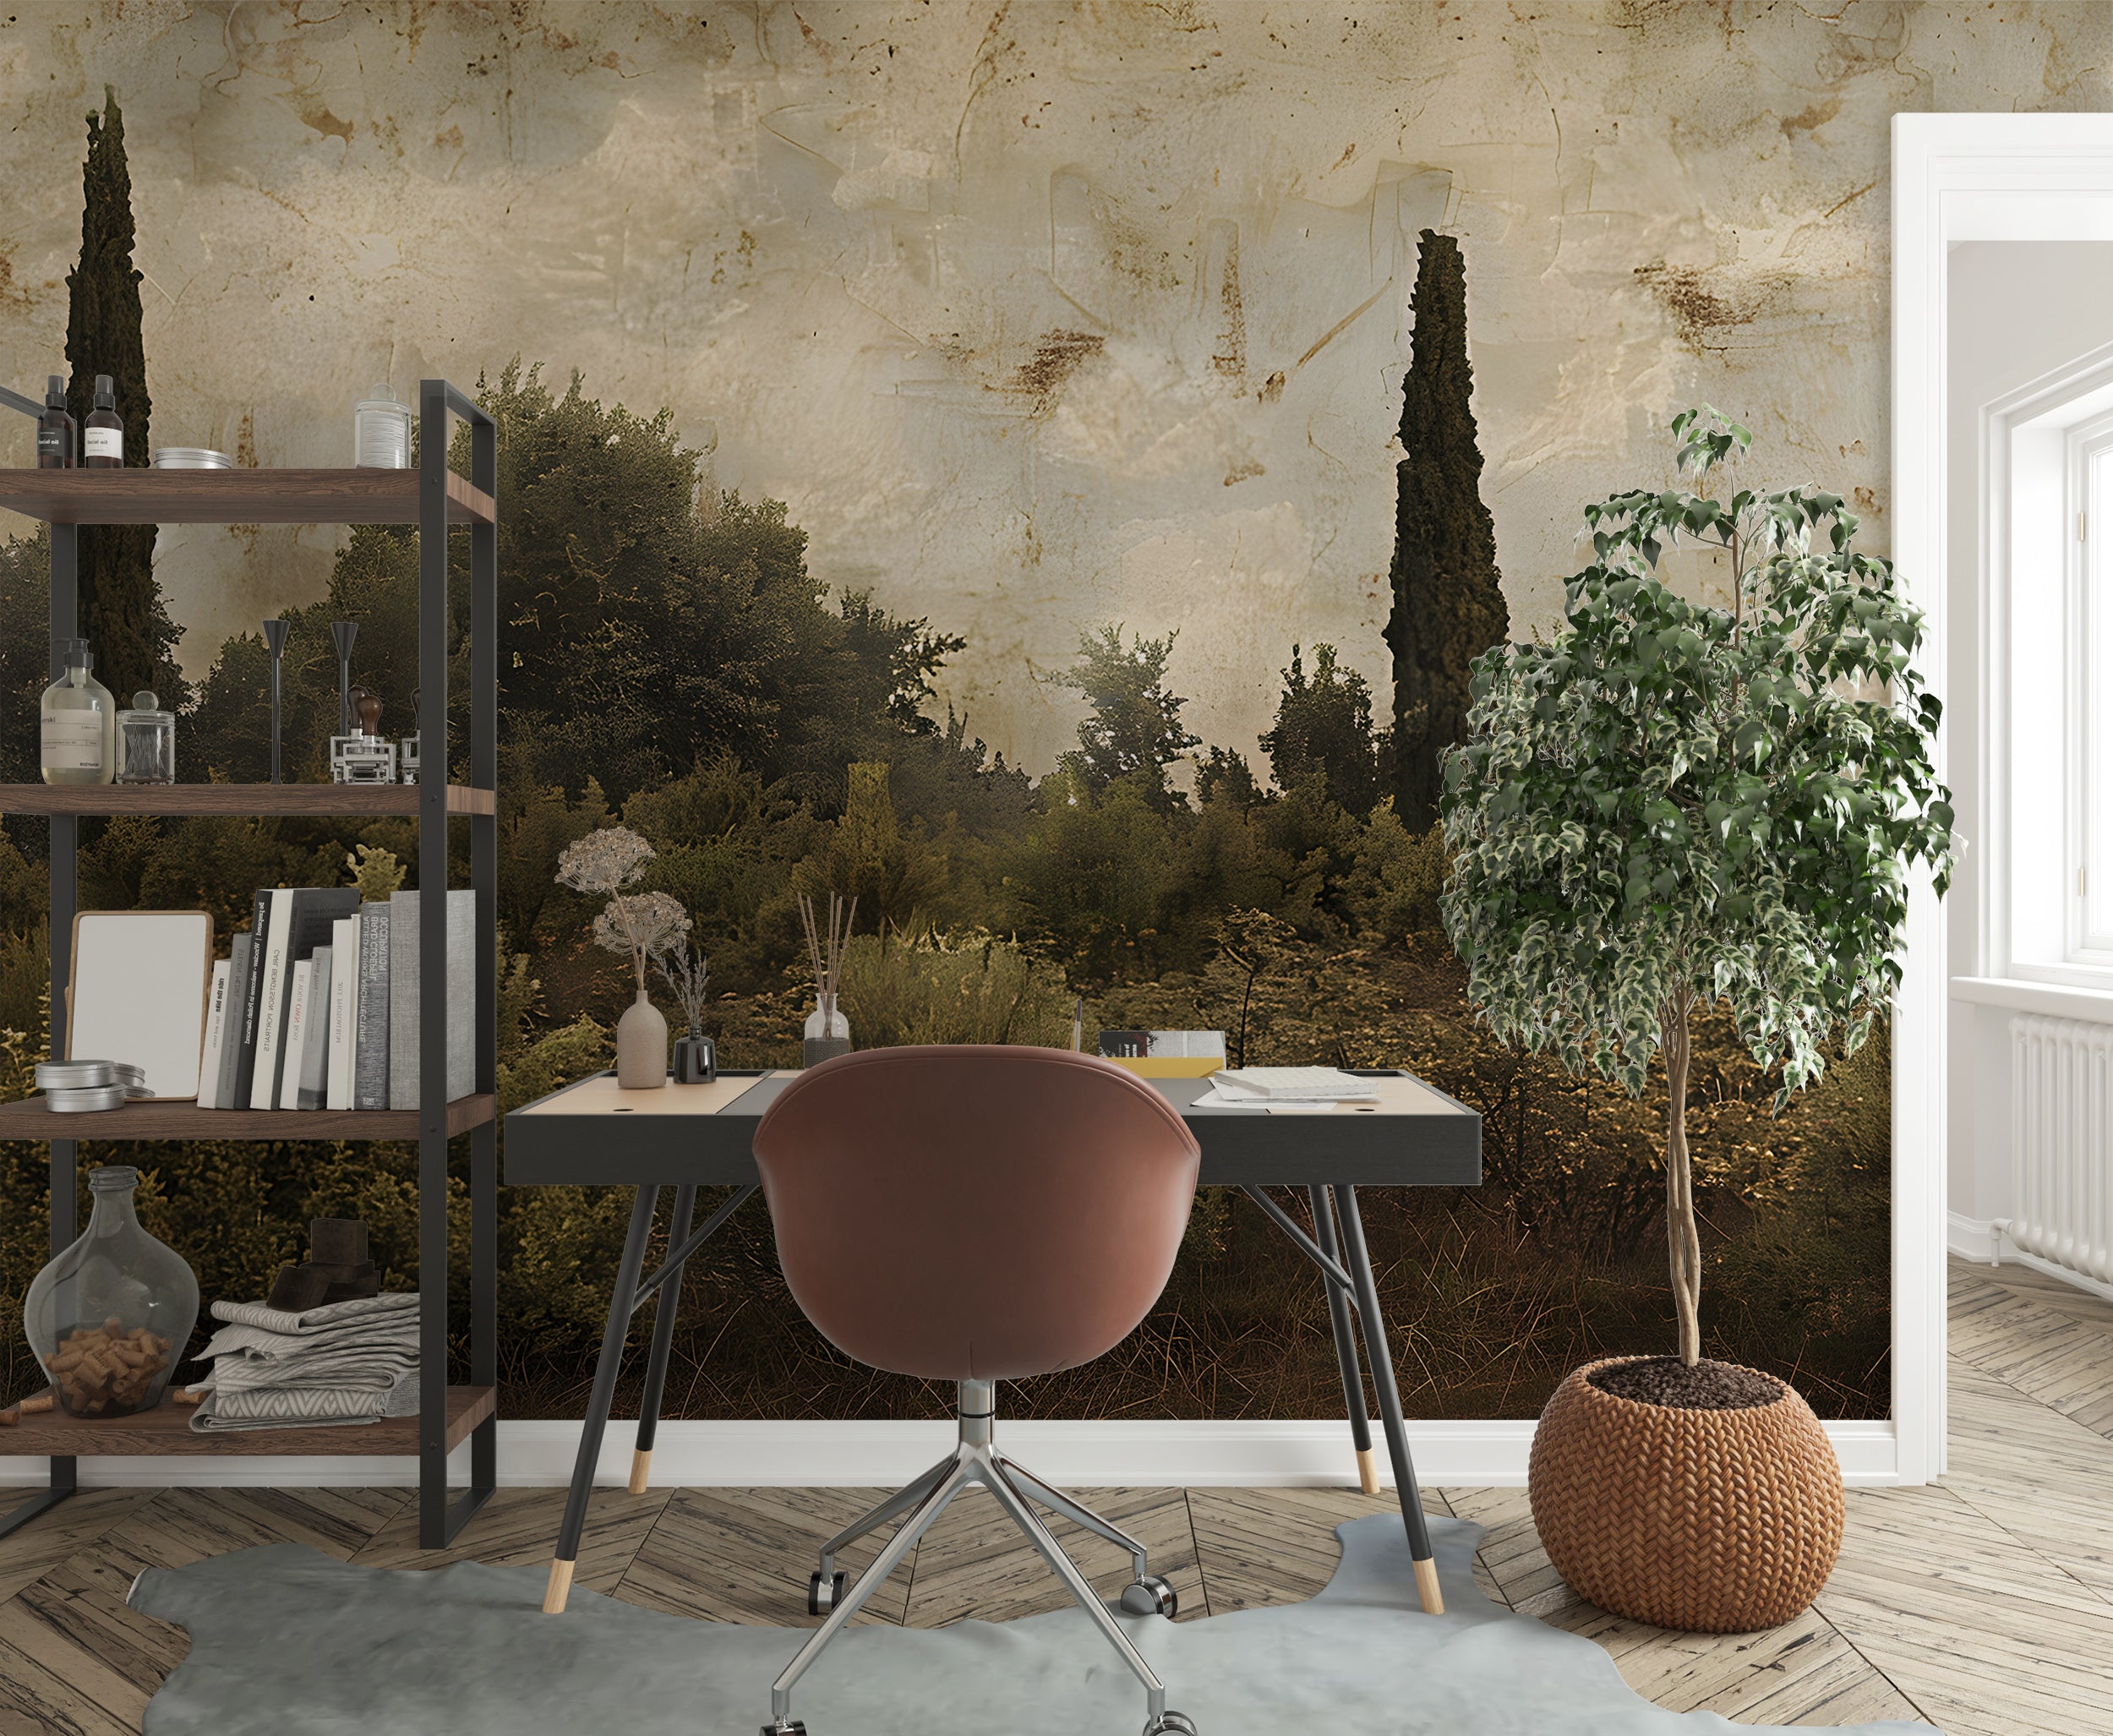 Vintage Landscape Wall Mural, Rustic Botanical Wallpaper, Scenic Wall Art, Peel and Stick Antique Wallpaper, Bushes and Trees Classic Decor